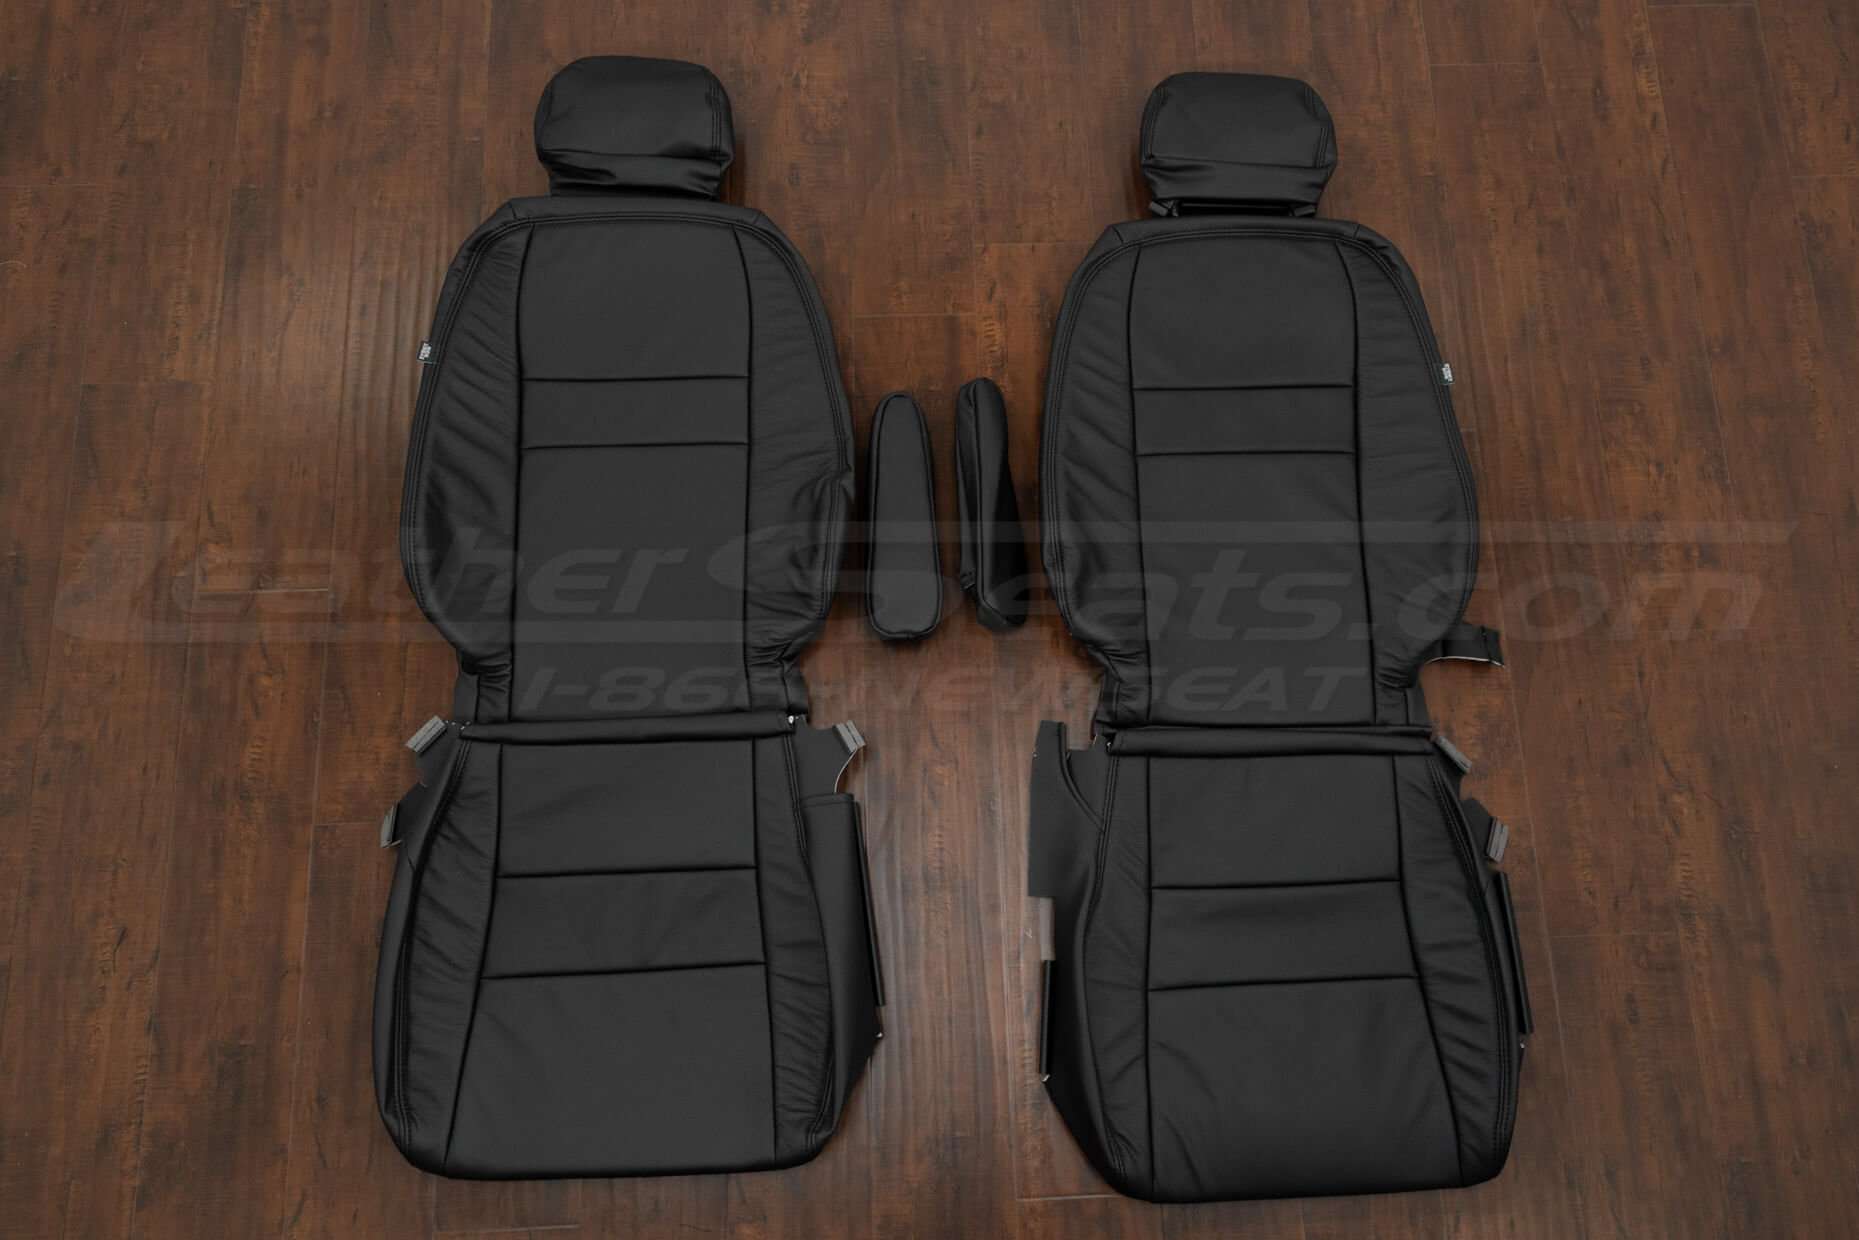 2007-2009 Honda CR-V SUV Leather Seat Interior Kit - Black - Front seat upholstery with Armrests